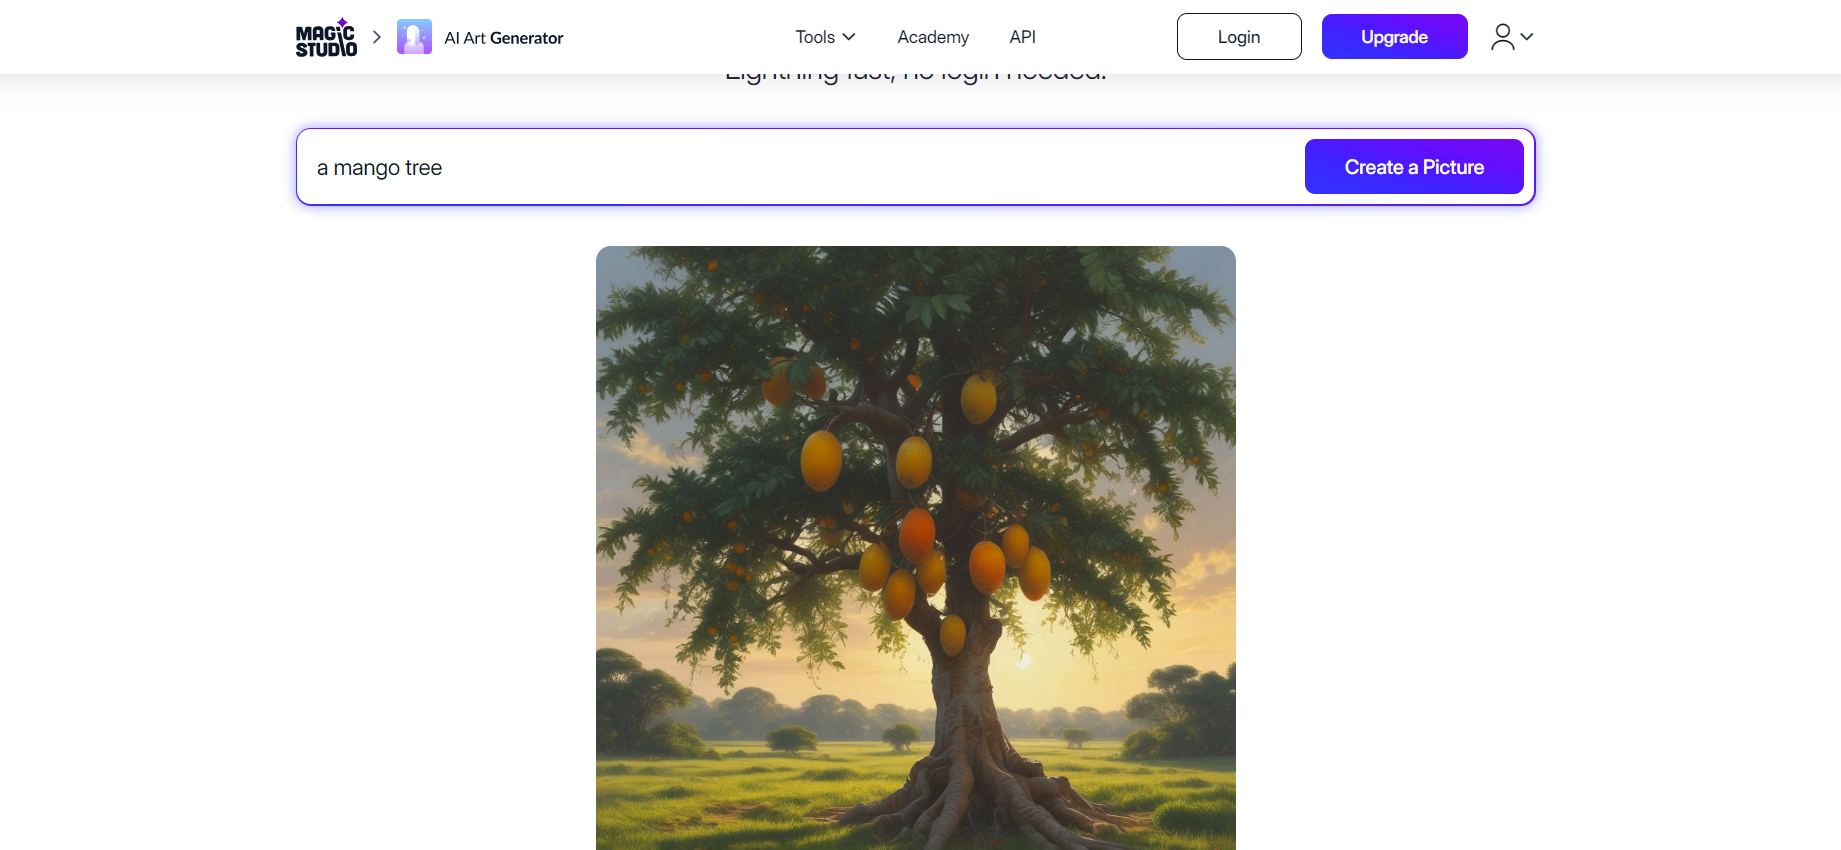 An image of a mango tree generated by an AI art generator